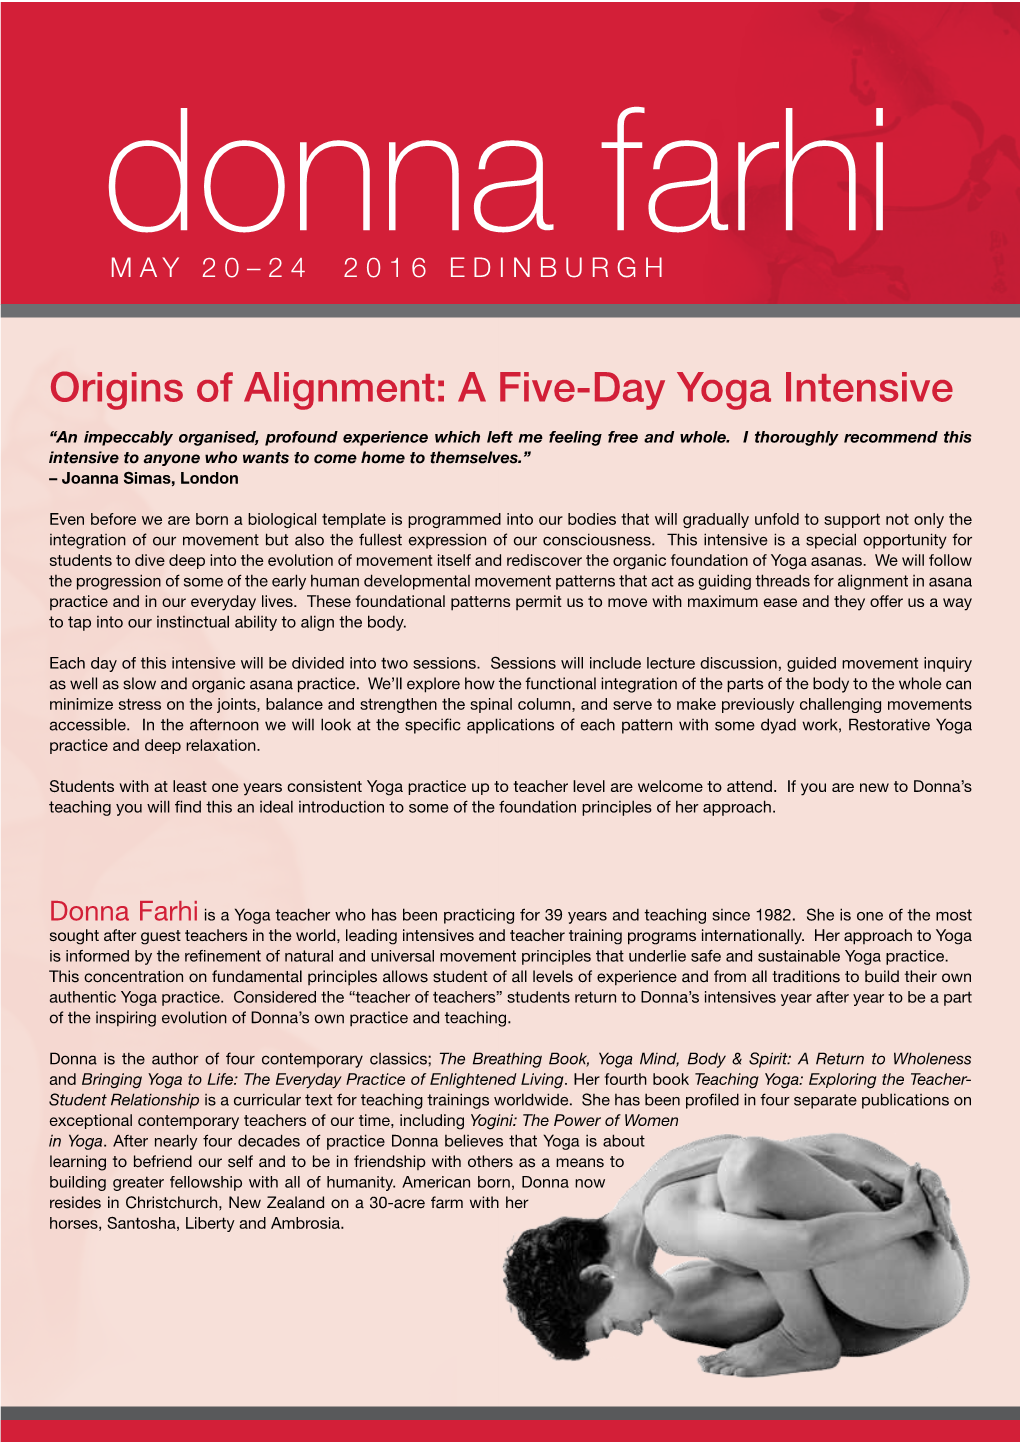 Origins of Alignment: a Five-Day Yoga Intensive